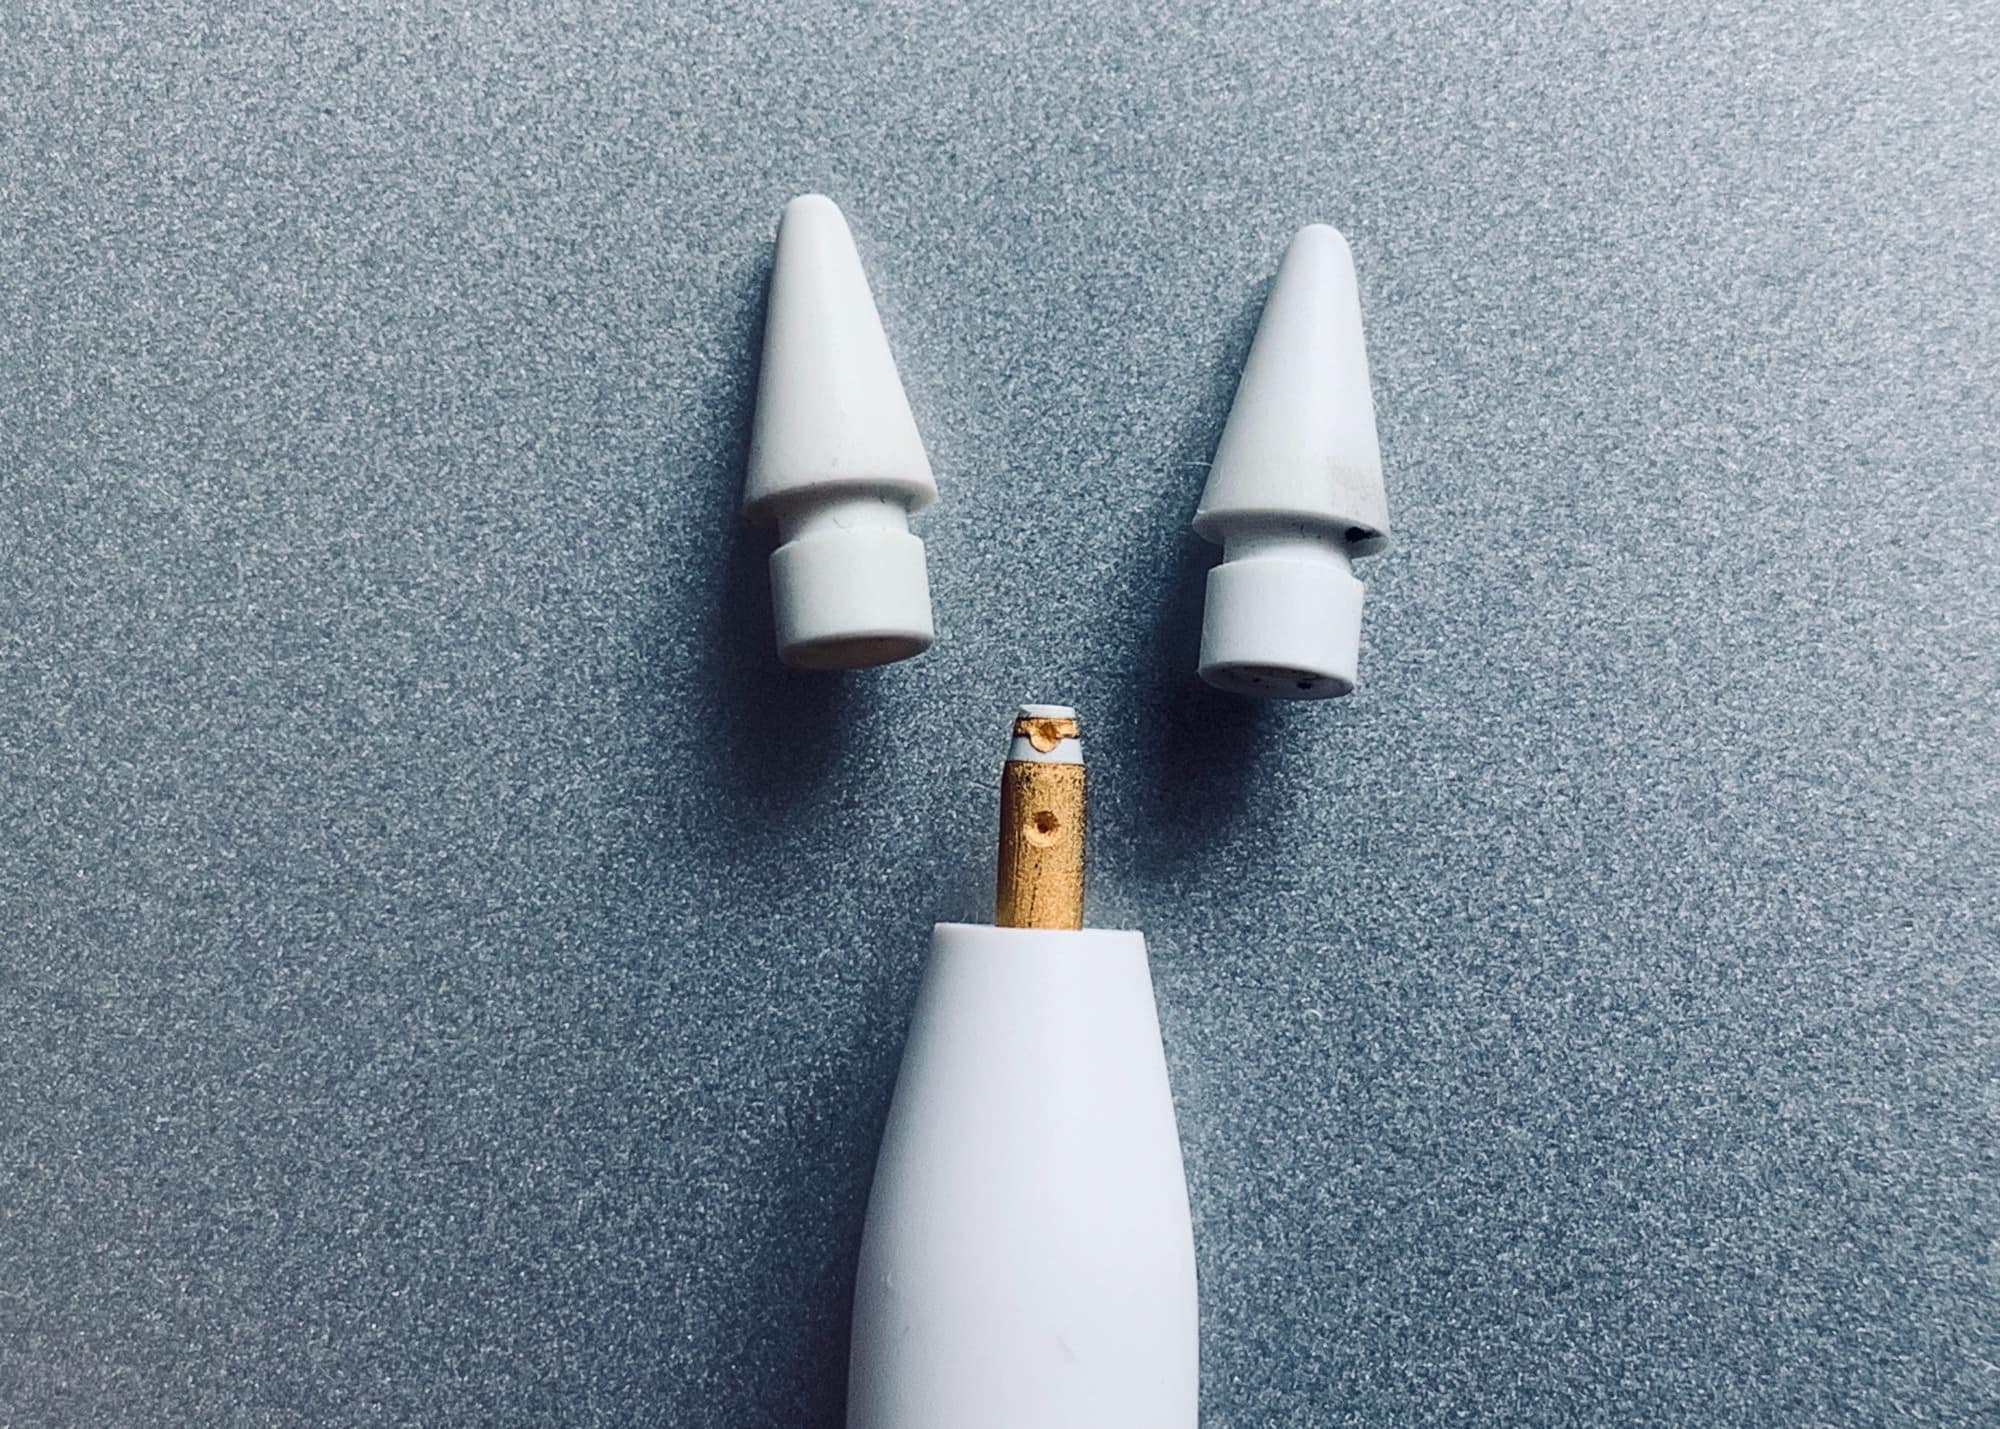 Apple Pencil tips are as easy to swap as they are to lose.